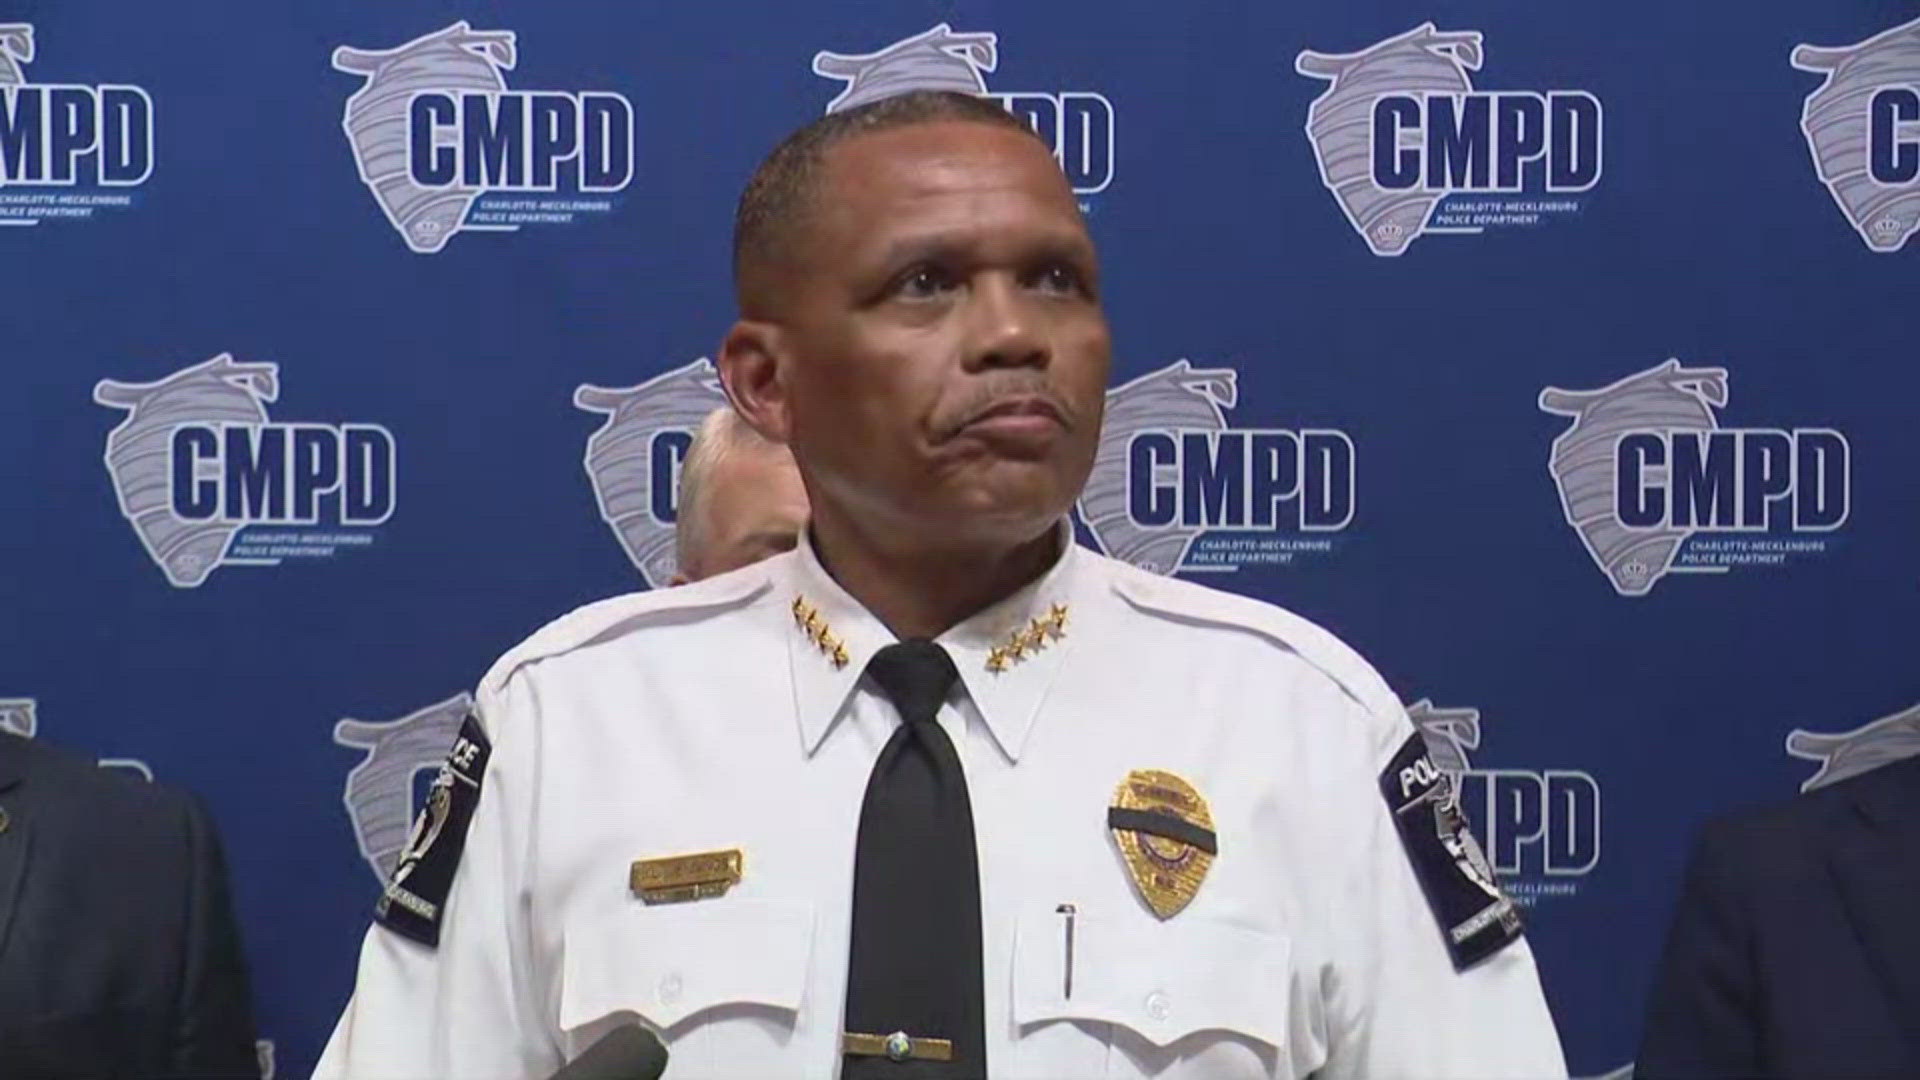 Charlotte-Mecklenburg Police Department Chief Johnny Jennings believes those who have committed crimes should be held "accountable" for their actions.